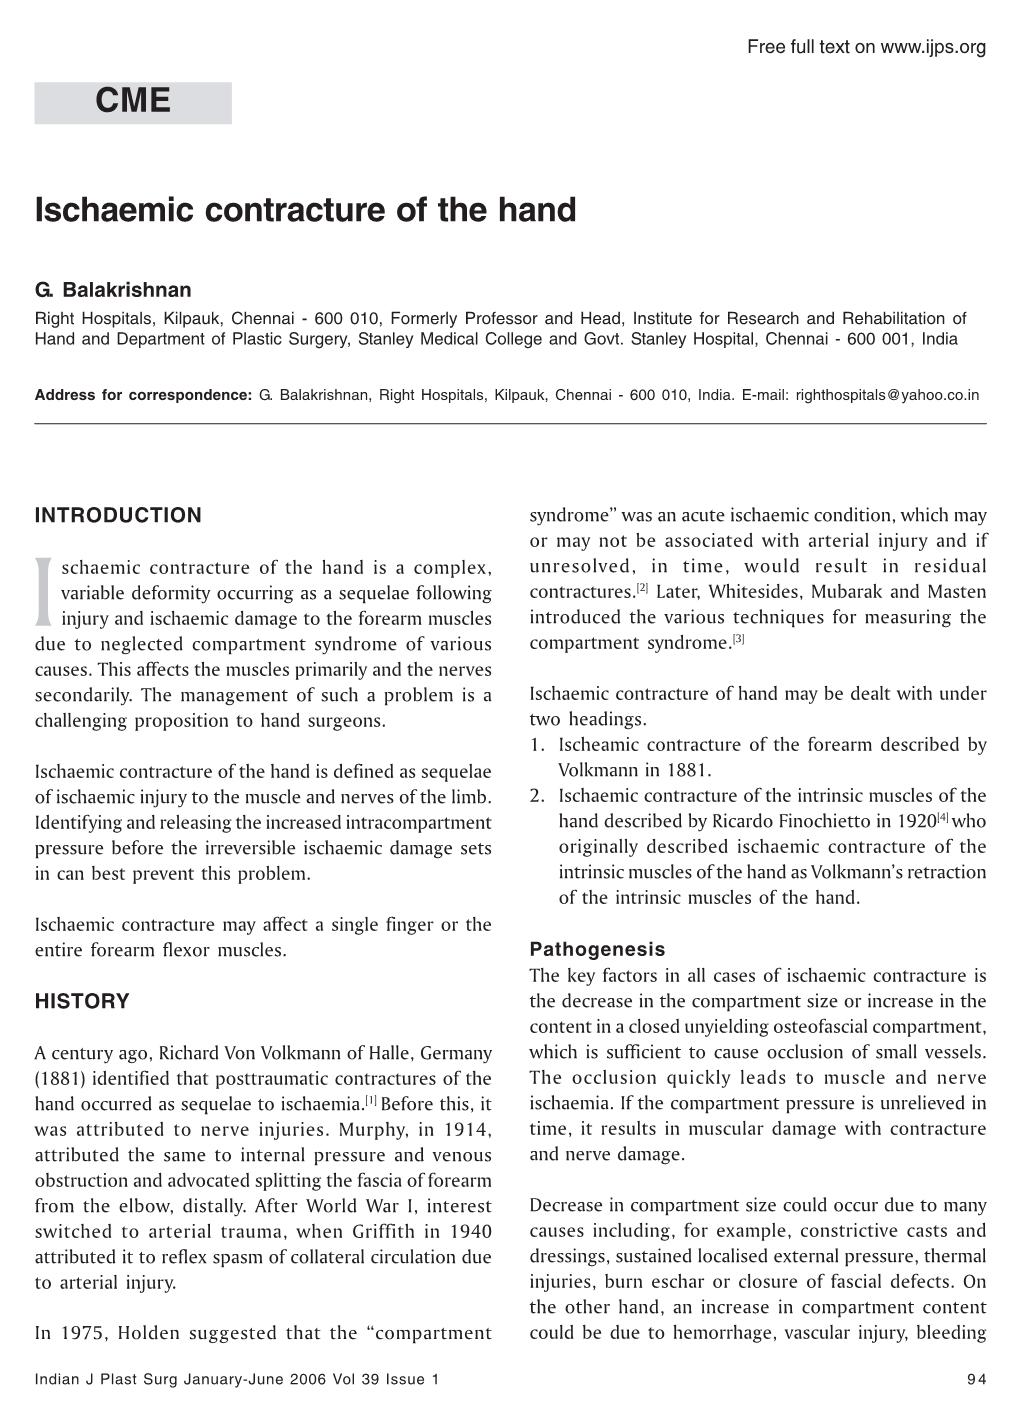 CME Ischaemic Contracture of the Hand